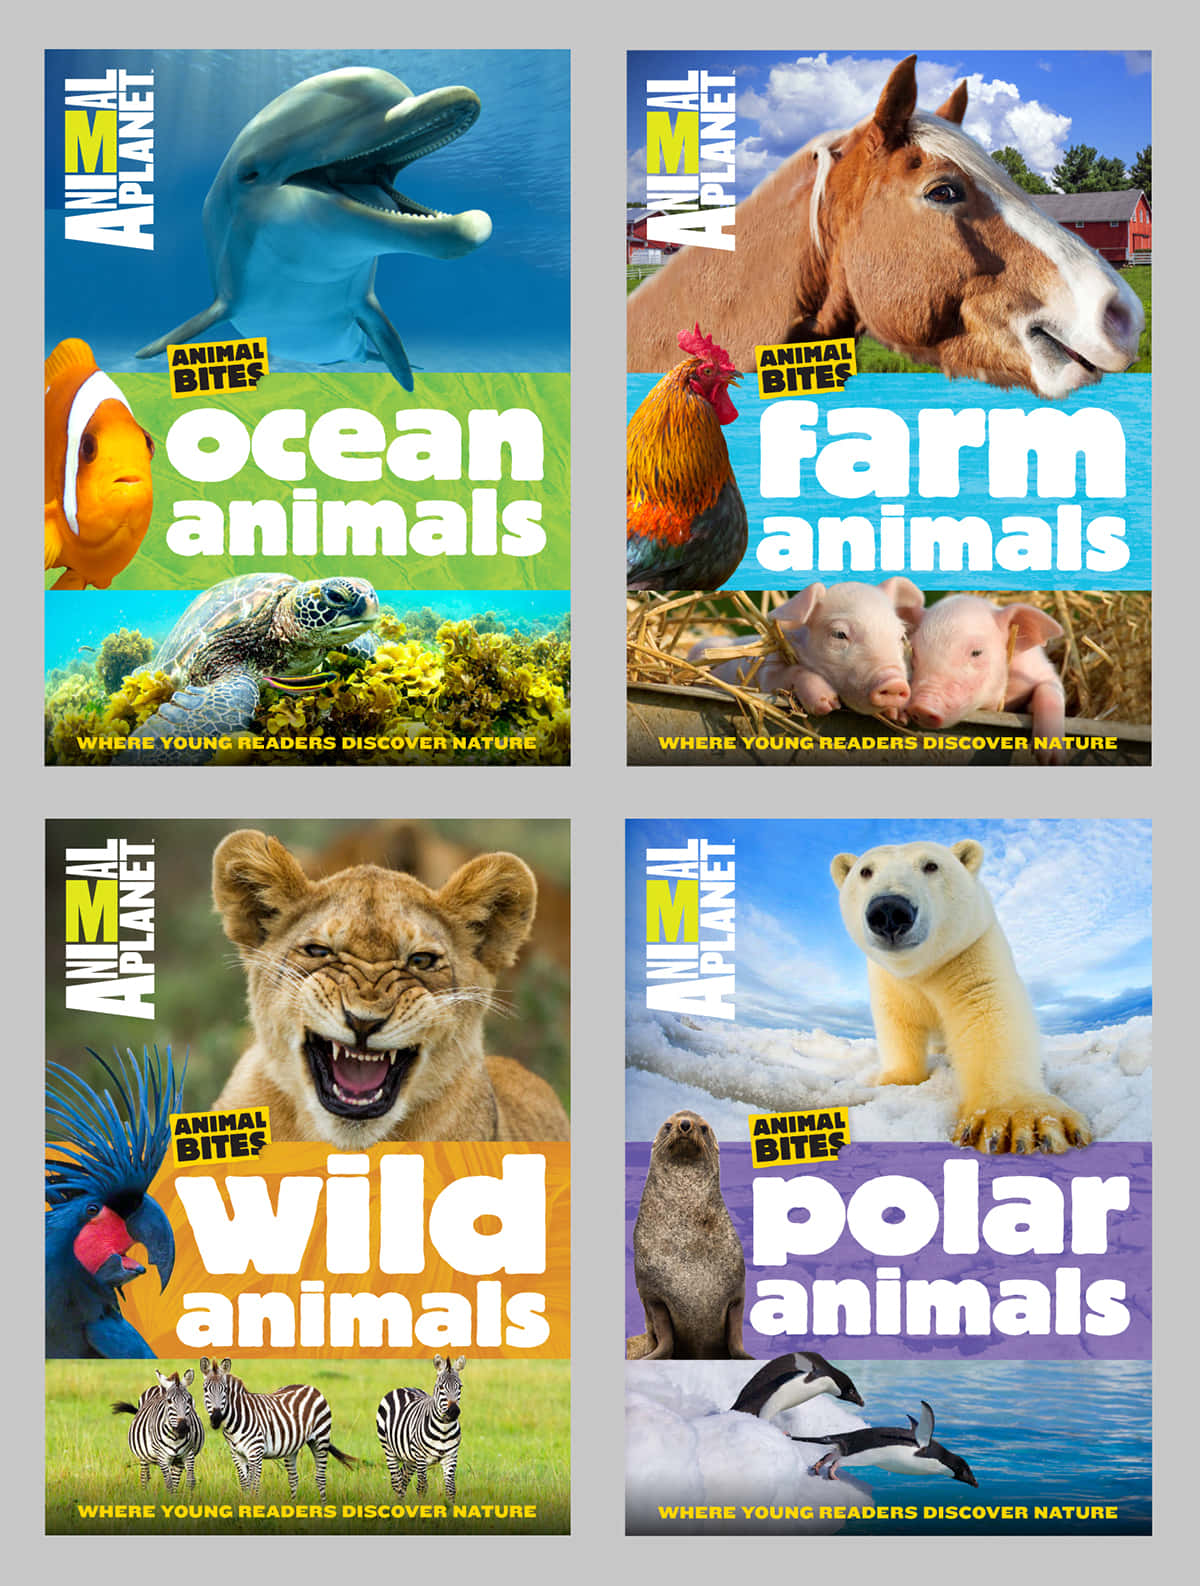 Explore our fascinating animal world with Animal Planet